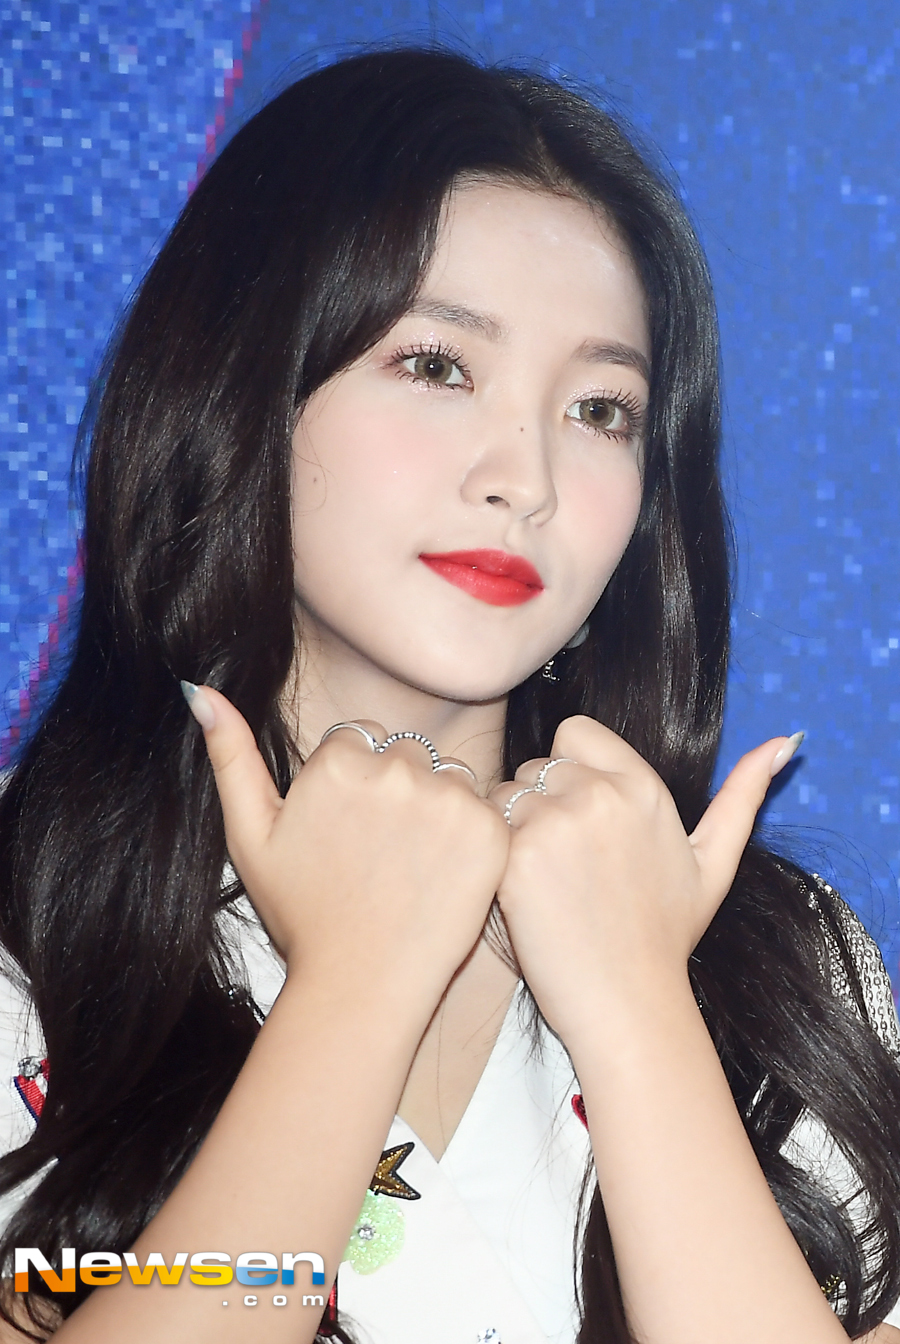 Red Velvet (Irene Wendy Slaughter Joey Yeri) attended the day.Meanwhile, Red Velvet summer mini album Summer Magic will be released on various music sites such as Melon, Genie, Naver Music, iTunes, Sporty, Apple Music and Shami Music at 6 p.m. on the 6th, and will also be released on the same day as the album.Jung Yoo-jin